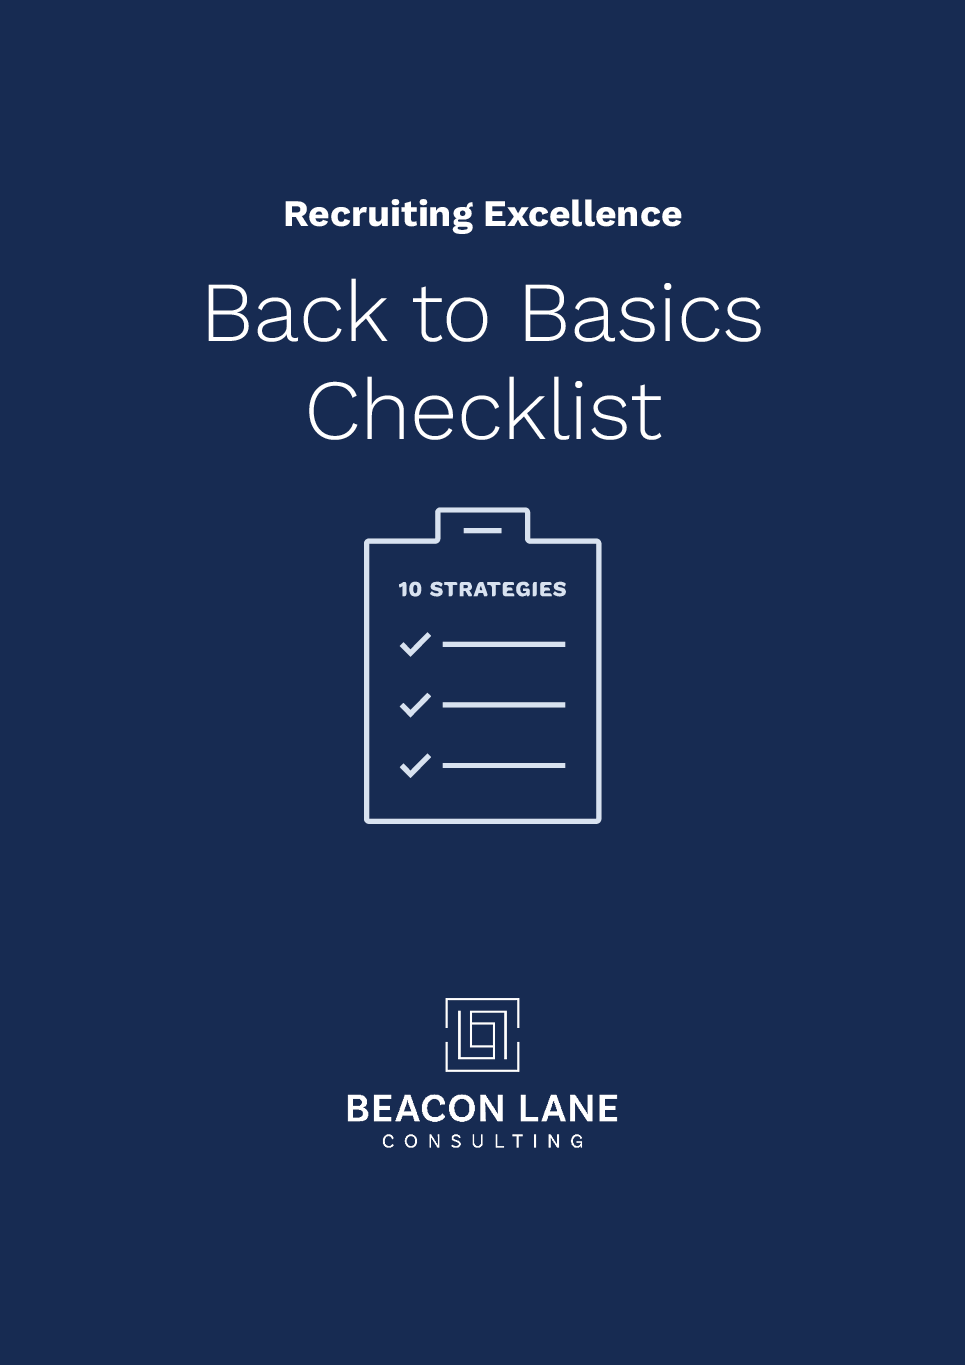 Recruiting Excellence | Back to Basics Checklist